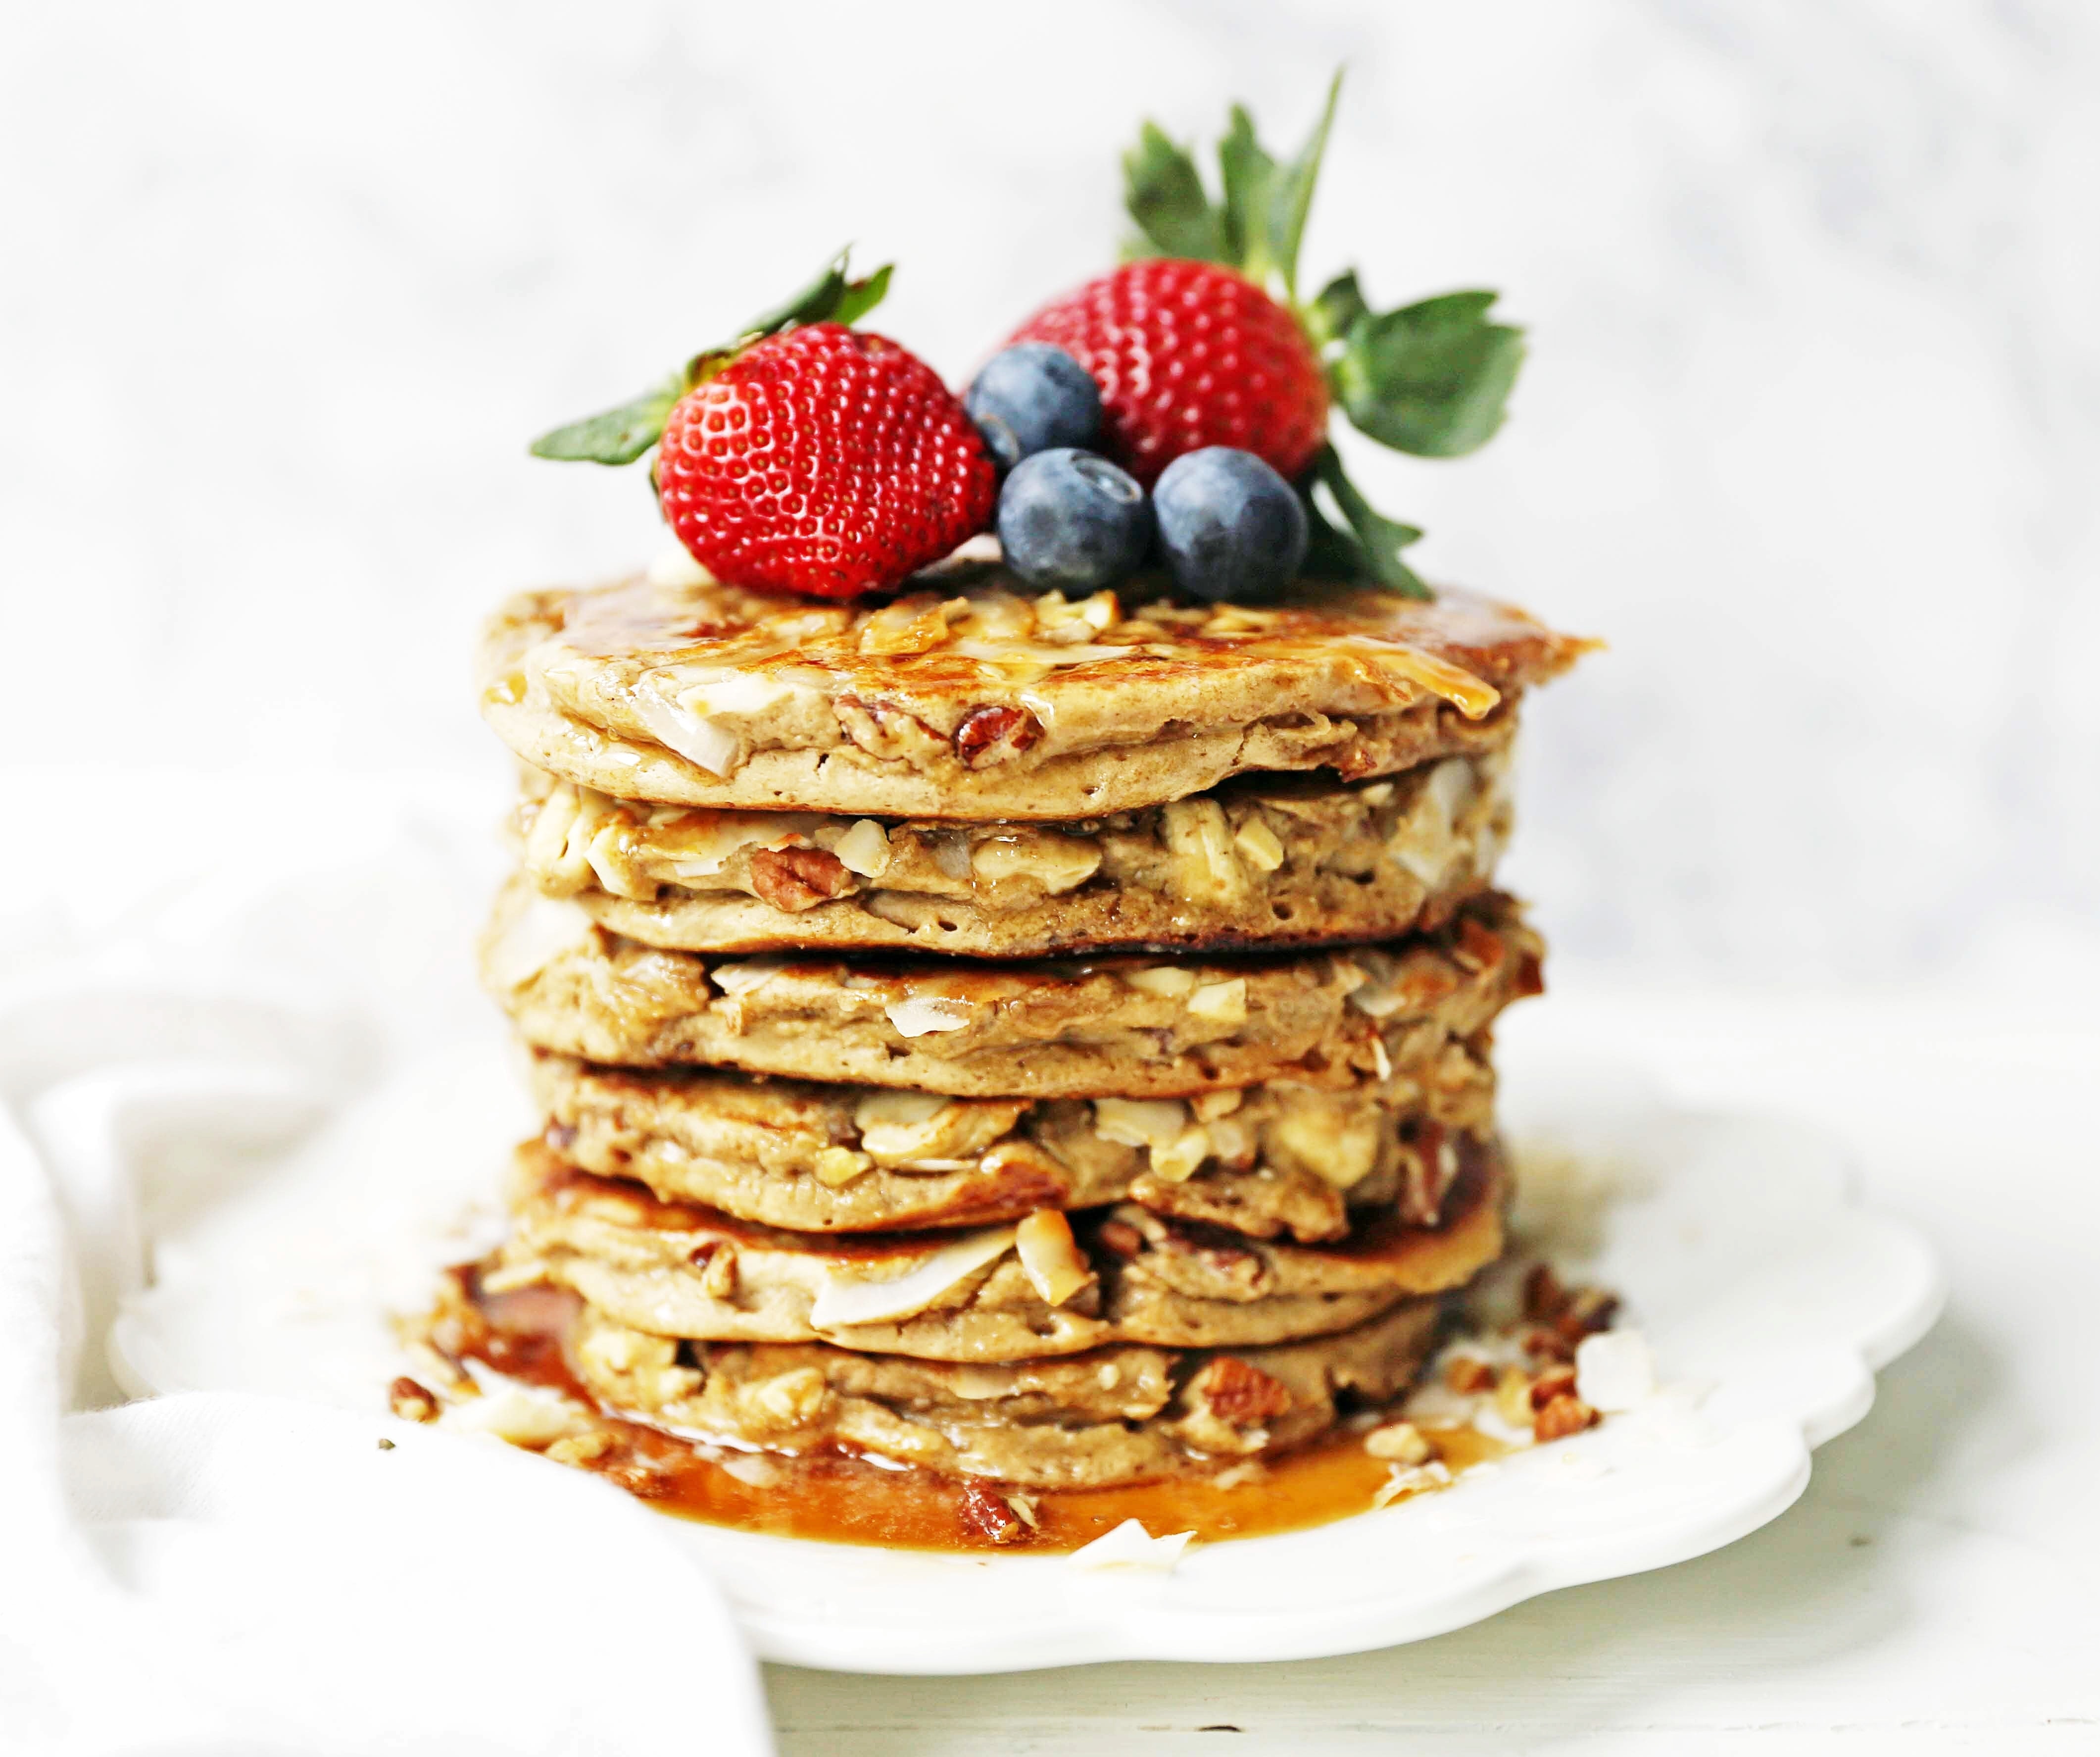 Nutty Granola Pancakes. Gluten-Free, Dairy-Free, No Added Sugar, Healthy Pancakes filled with oats, nuts, and coconut flakes. A hearty, filling breakfast! www.modernhoney.com #pancakes #pancake #healthy #glutenfree #dairyfree #breakfast